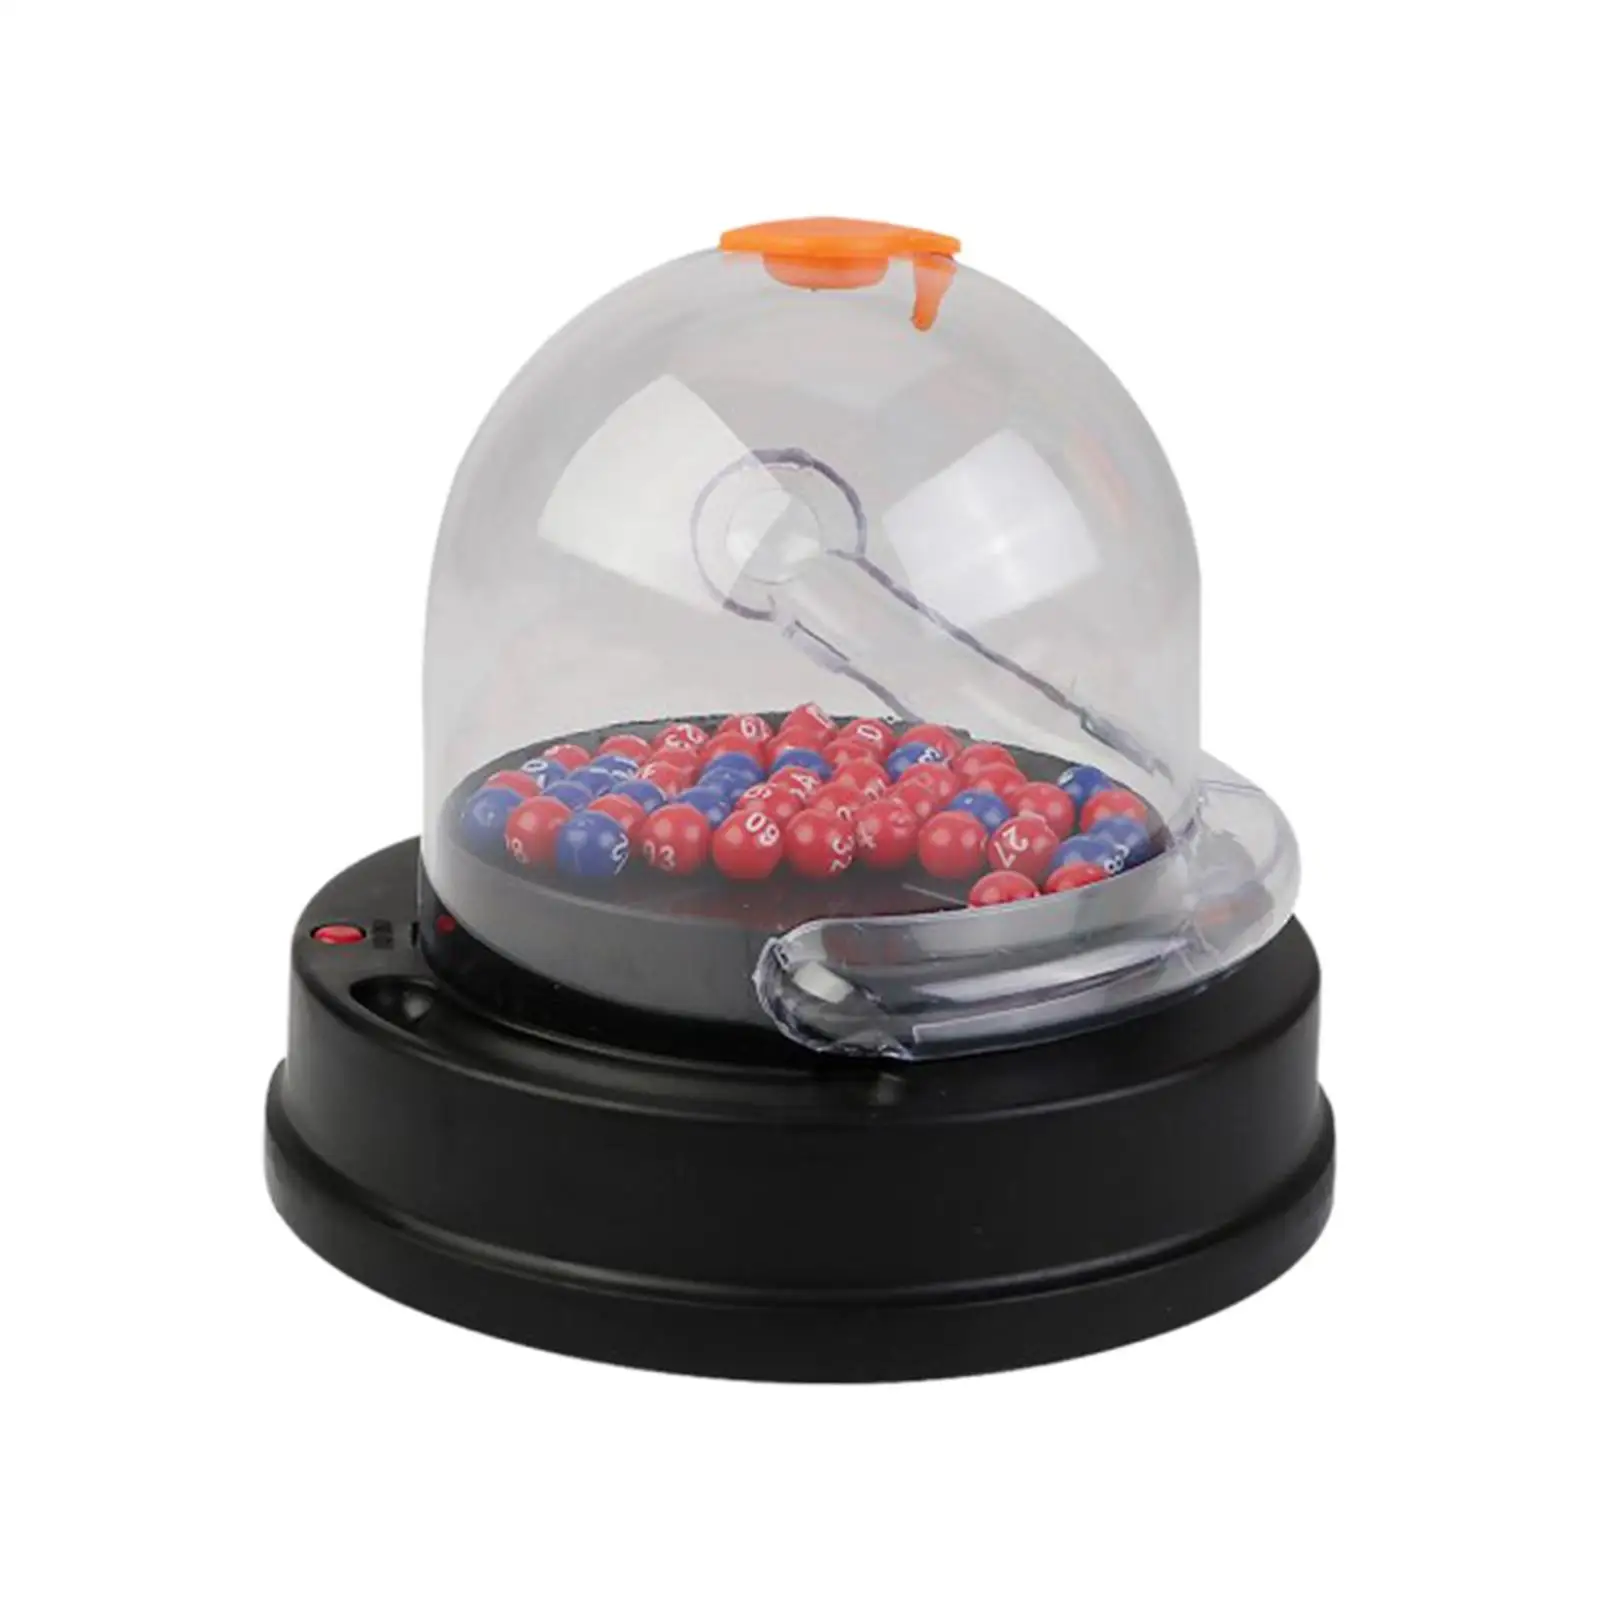 Electric Lottery Toy with Balls Mini Lottery Bingo Games Electric Lottery Machine for Recreational Activity Cafe